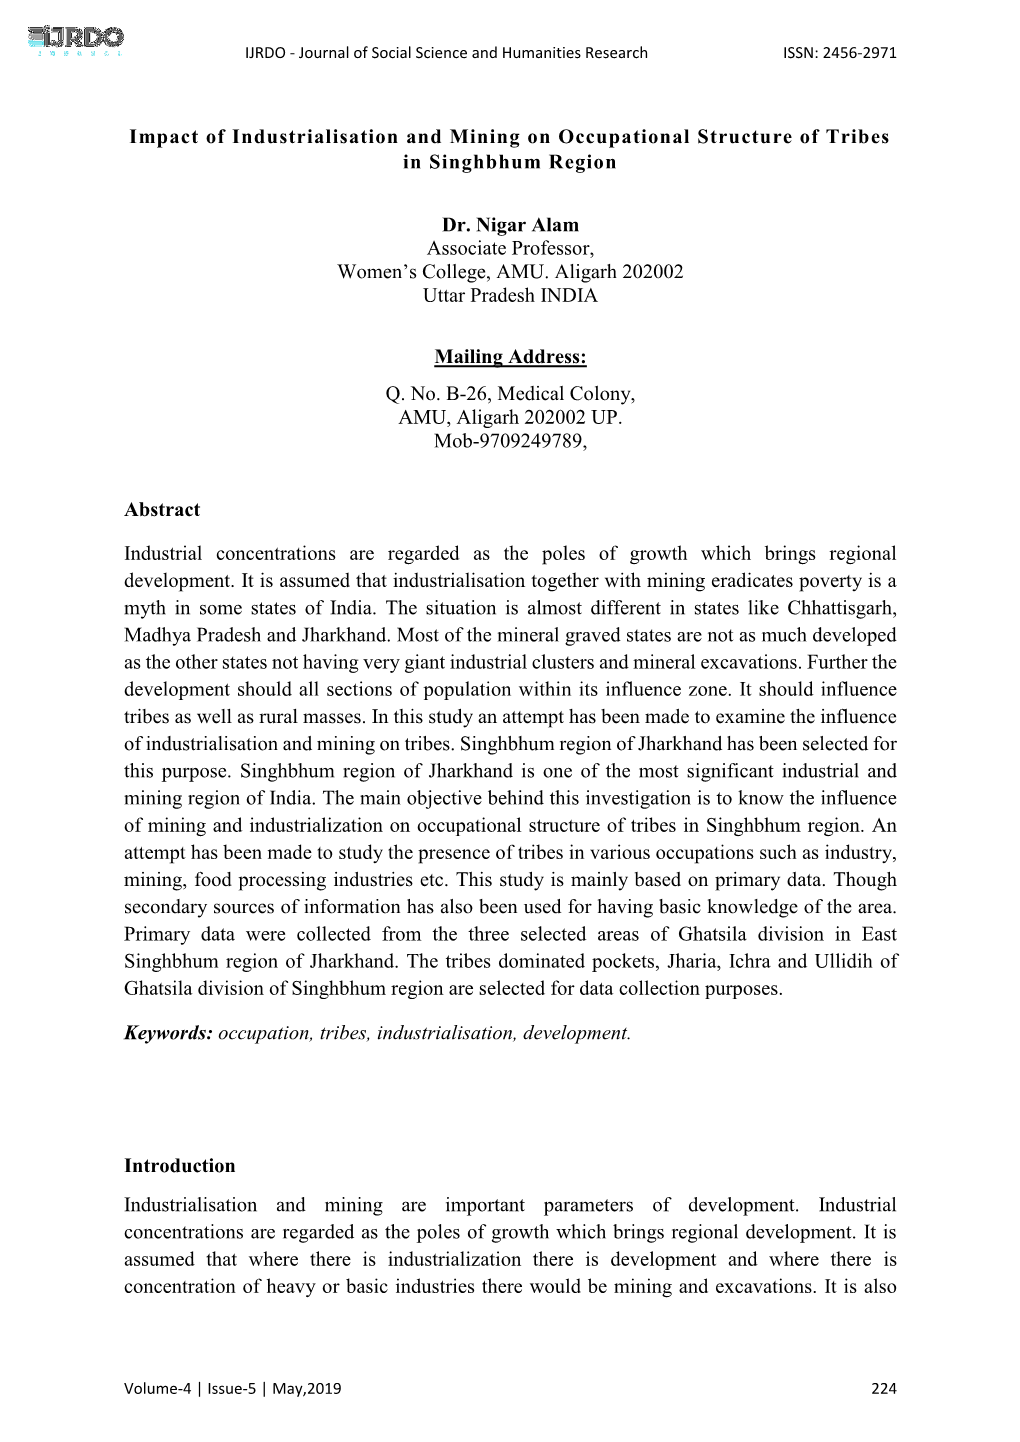 Impact of Industrialisation and Mining on Occupational Structure of Tribes in Singhbhum Region